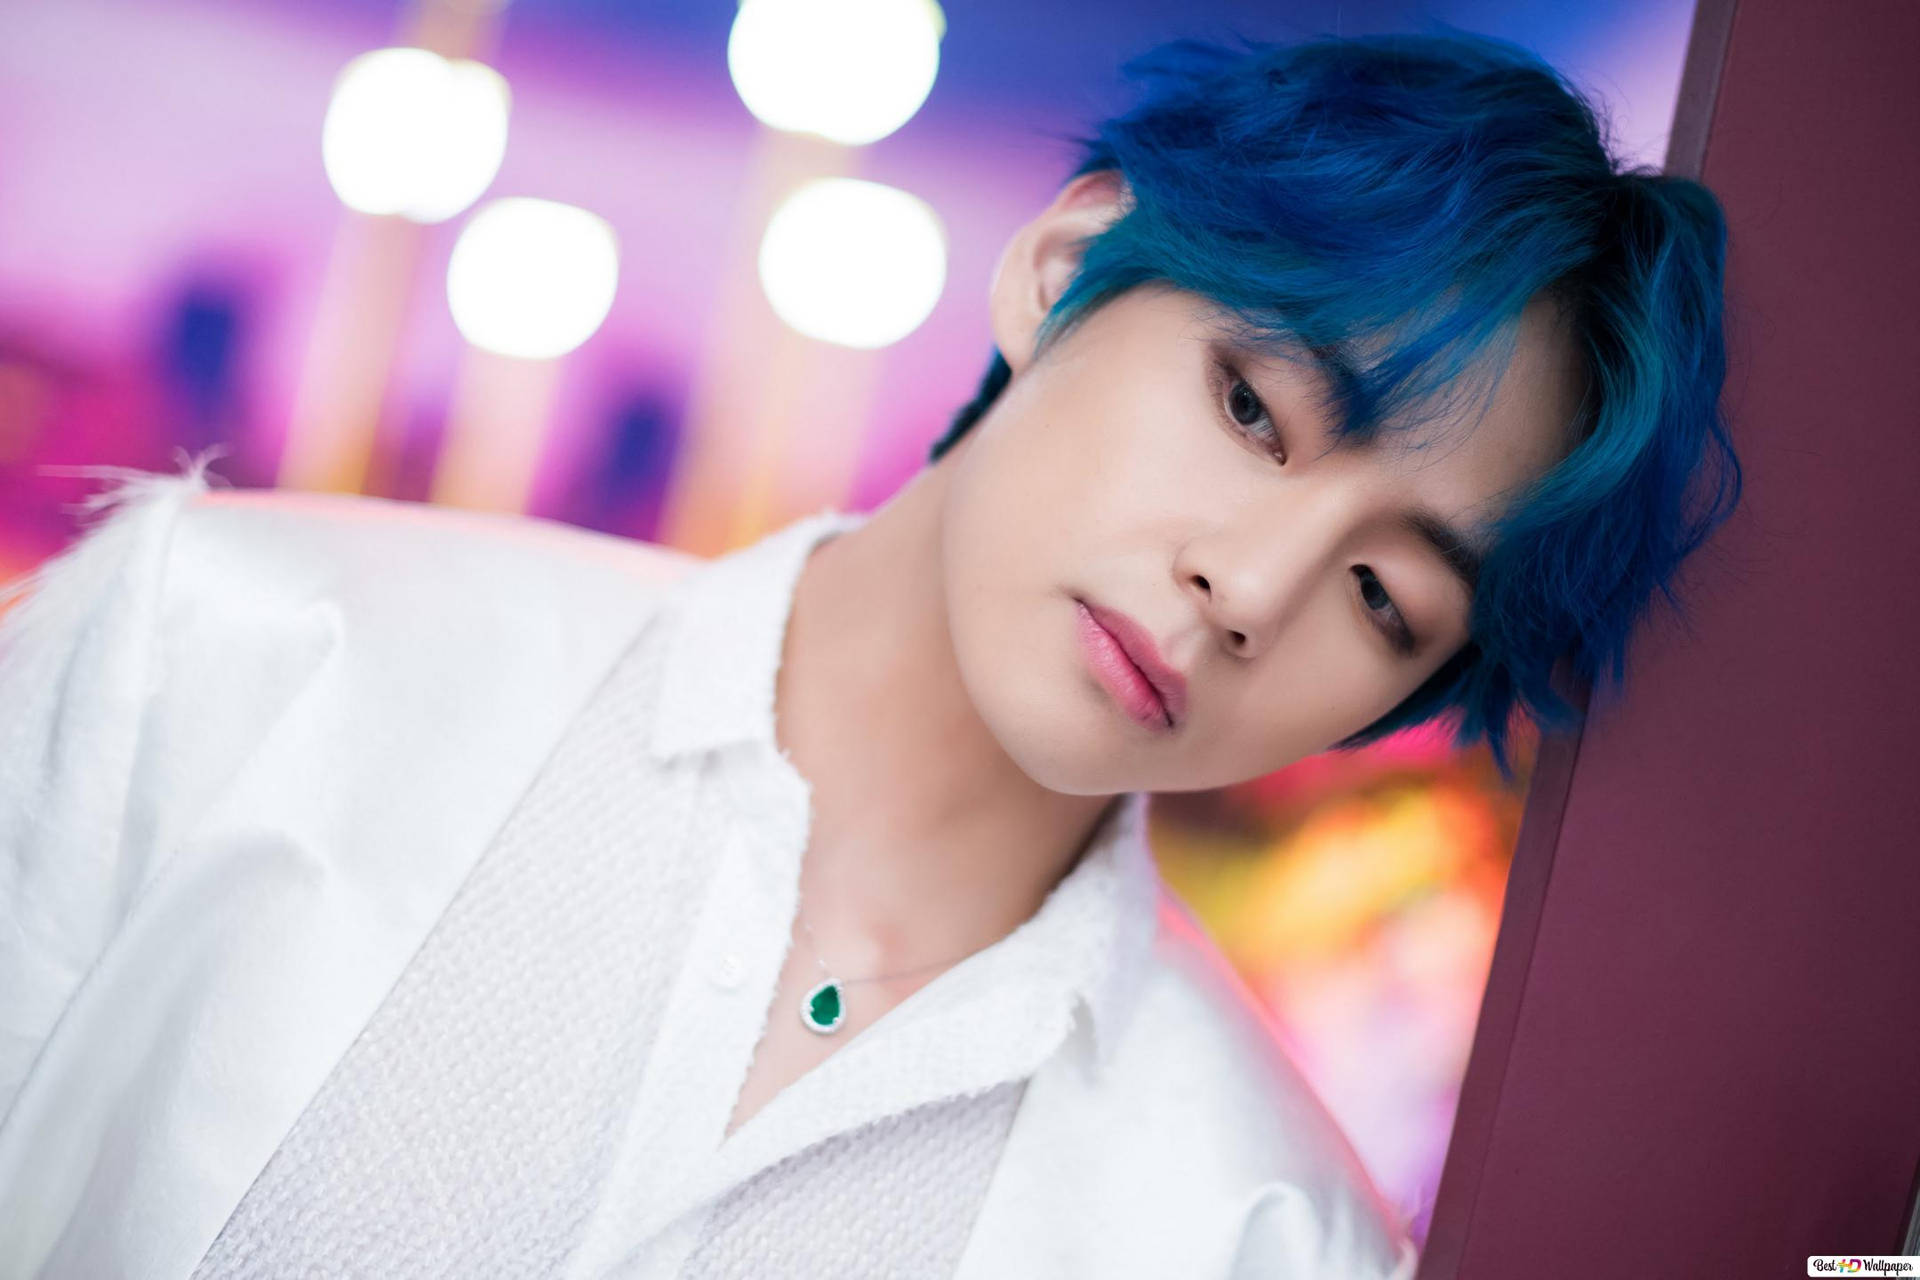 Bts V Leaning On Wall Background